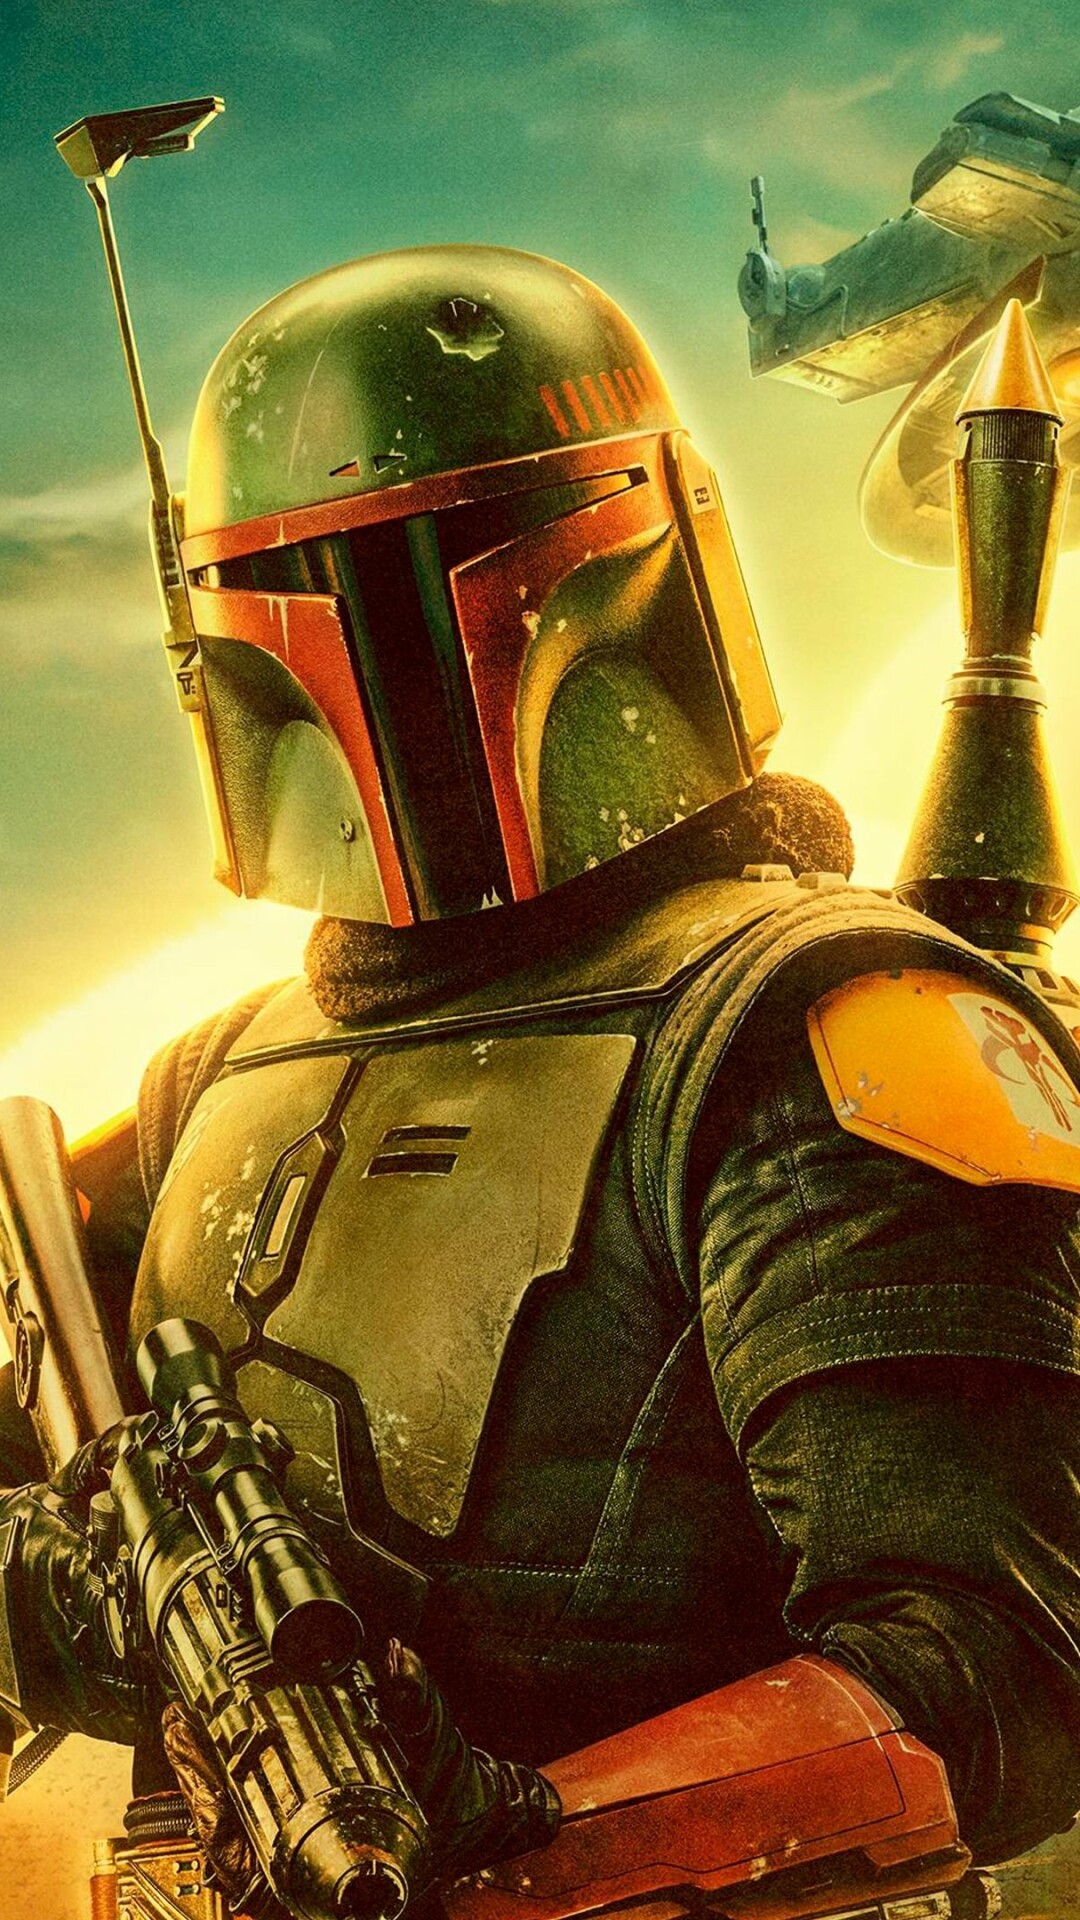 The Book of Boba Fett: A spin-off from the series The Mandalorian, taking place in the same timeframe as that series. 1080x1920 Full HD Wallpaper.